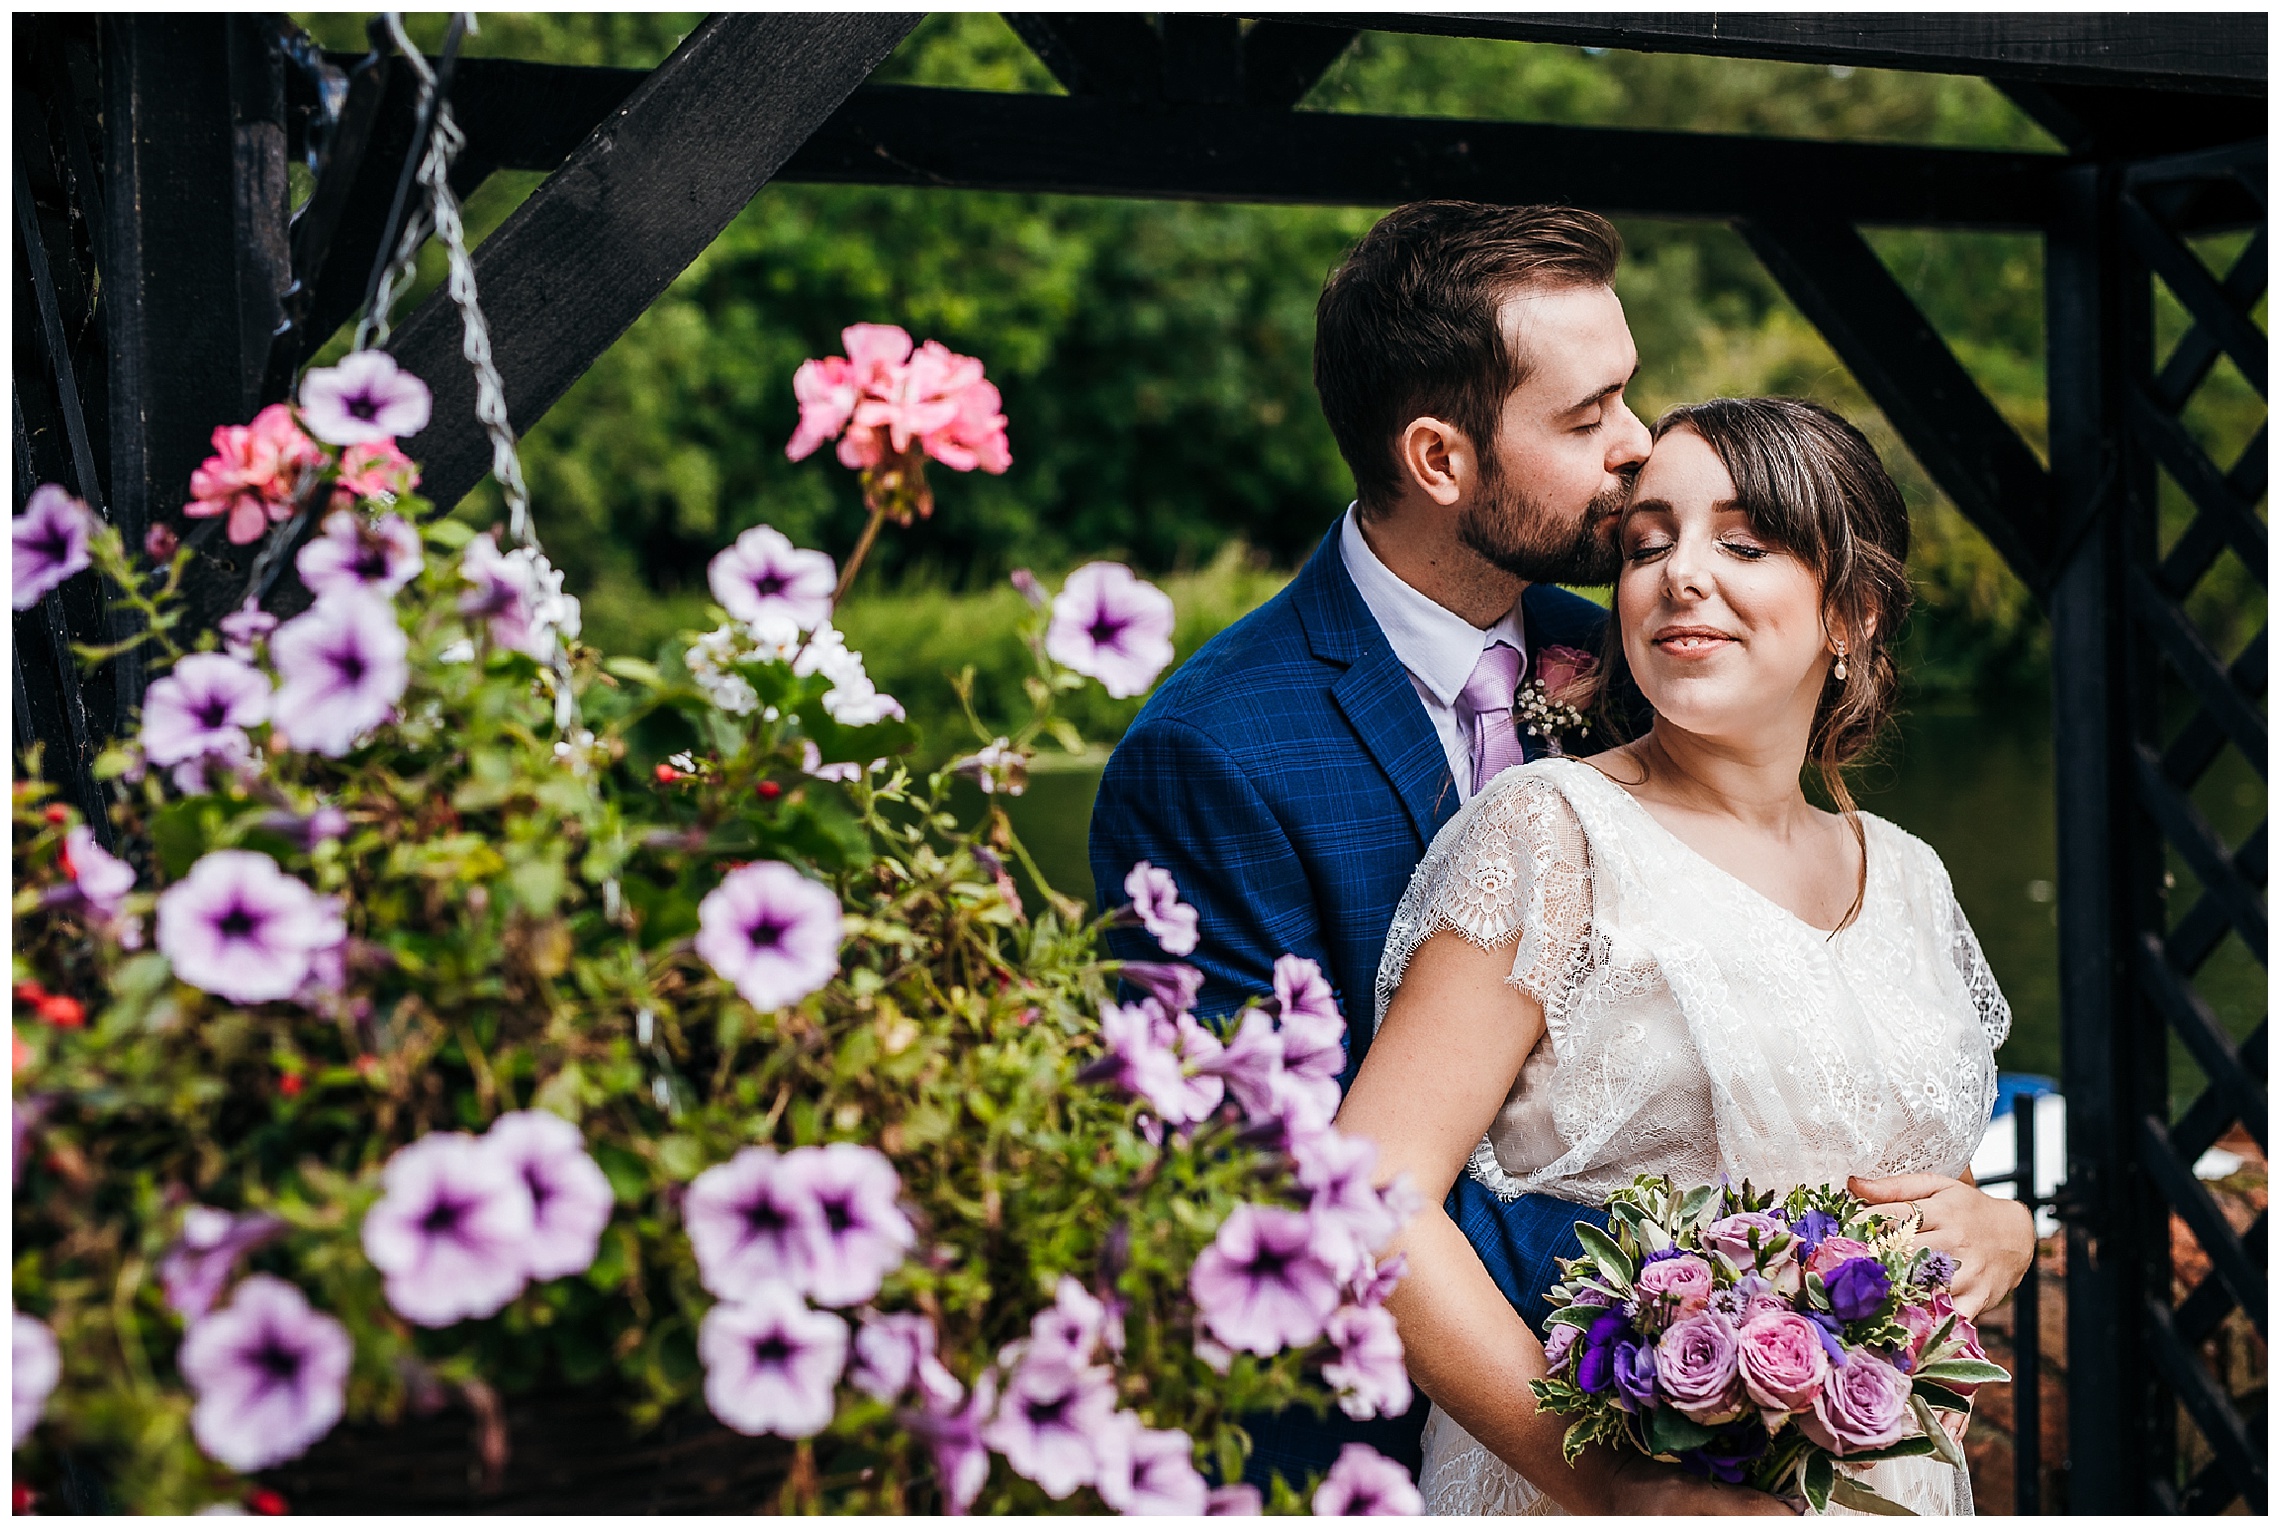 groom kissing pregnant bride on forehead with pansies in foreground